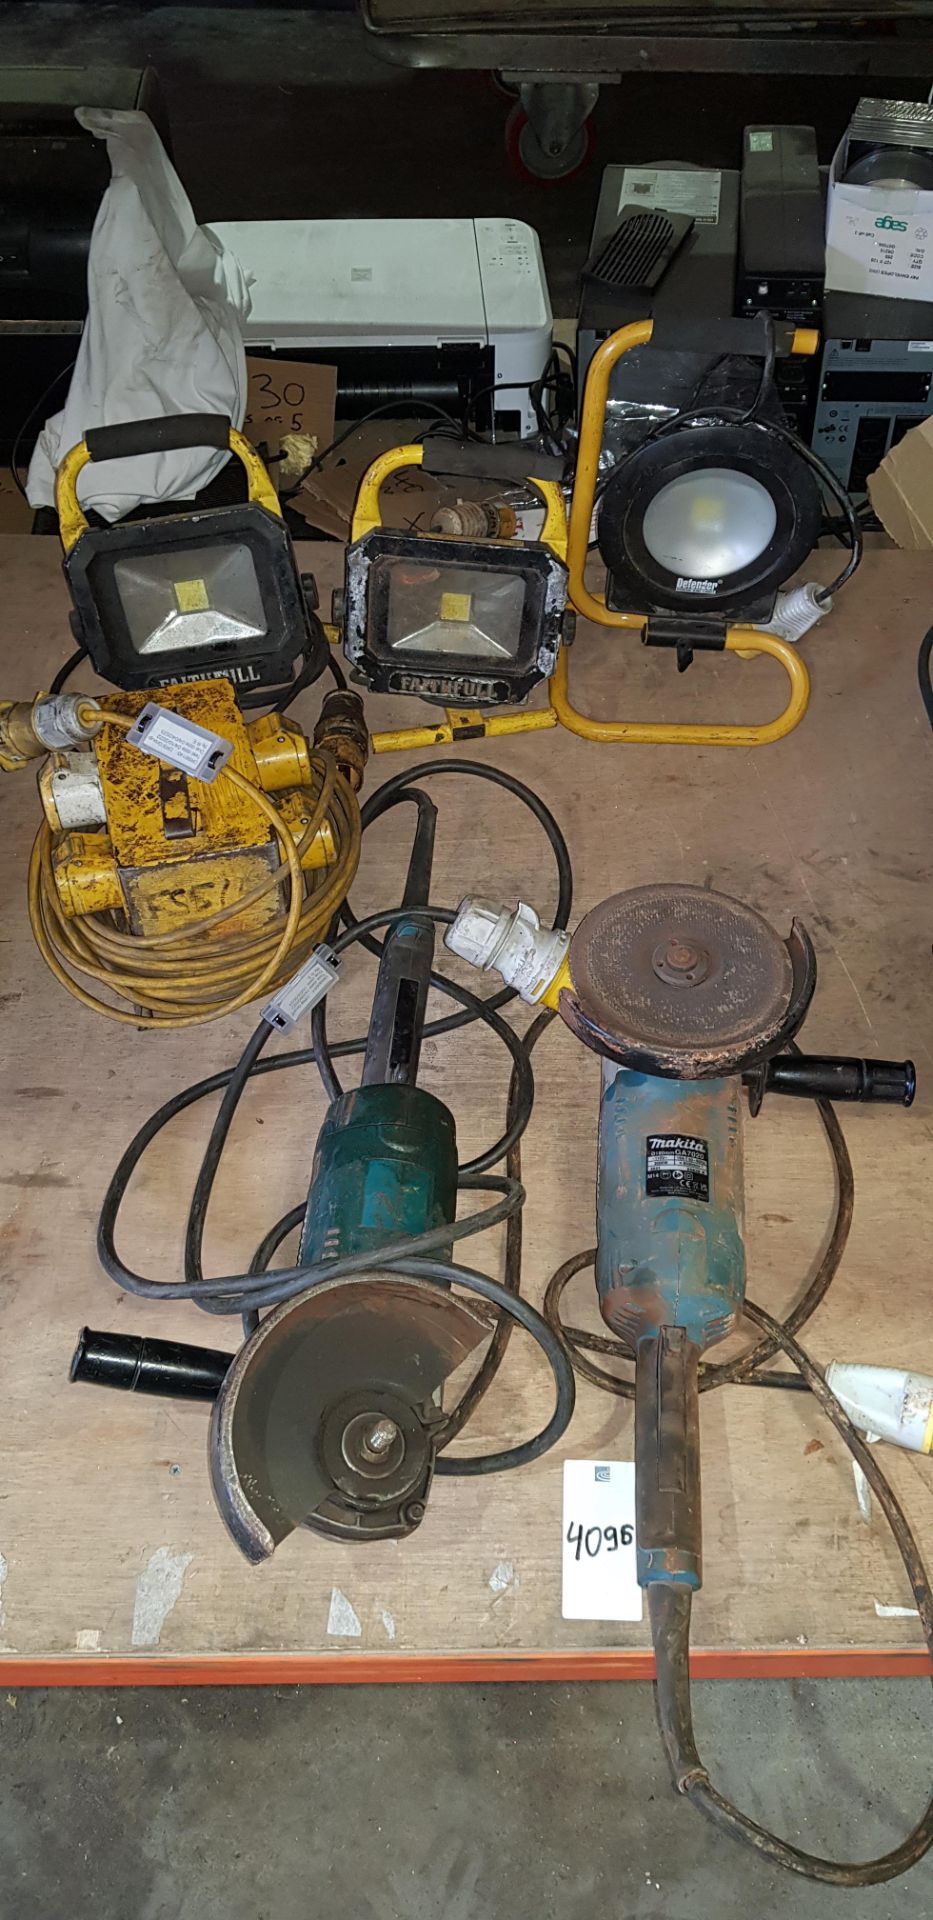 6 X MIXED LOT CONTAINING - 2 X MAKITA 180MM 110 V ANGLE GRINDERS - 3 X WORK LIGHTS - 1 X 110 VOLTS